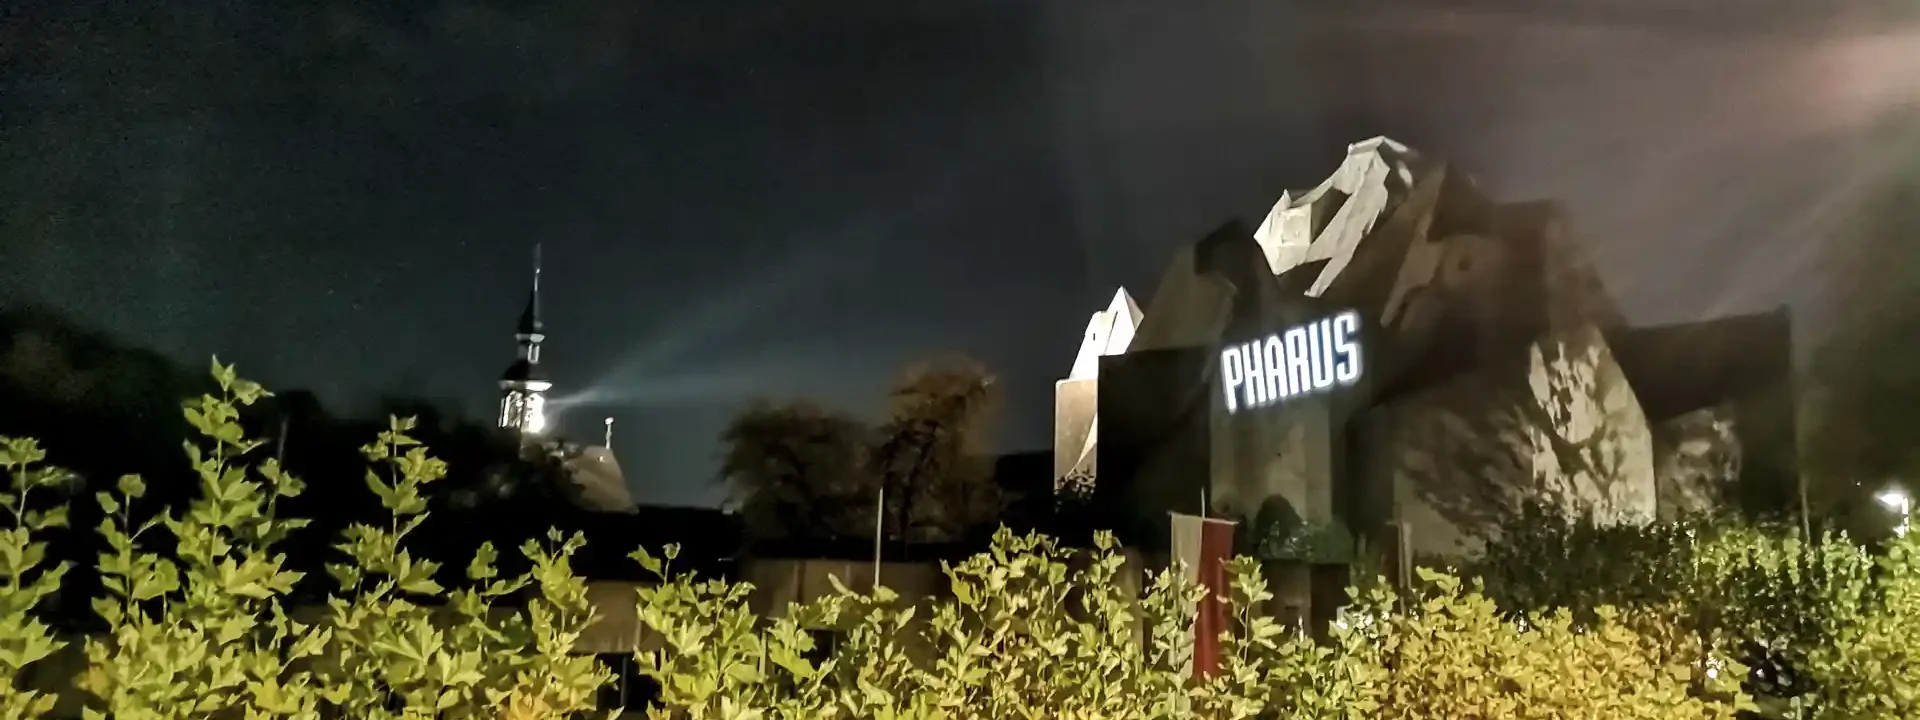 PHARUS lettering projected onto the Mariendom Neviges at night